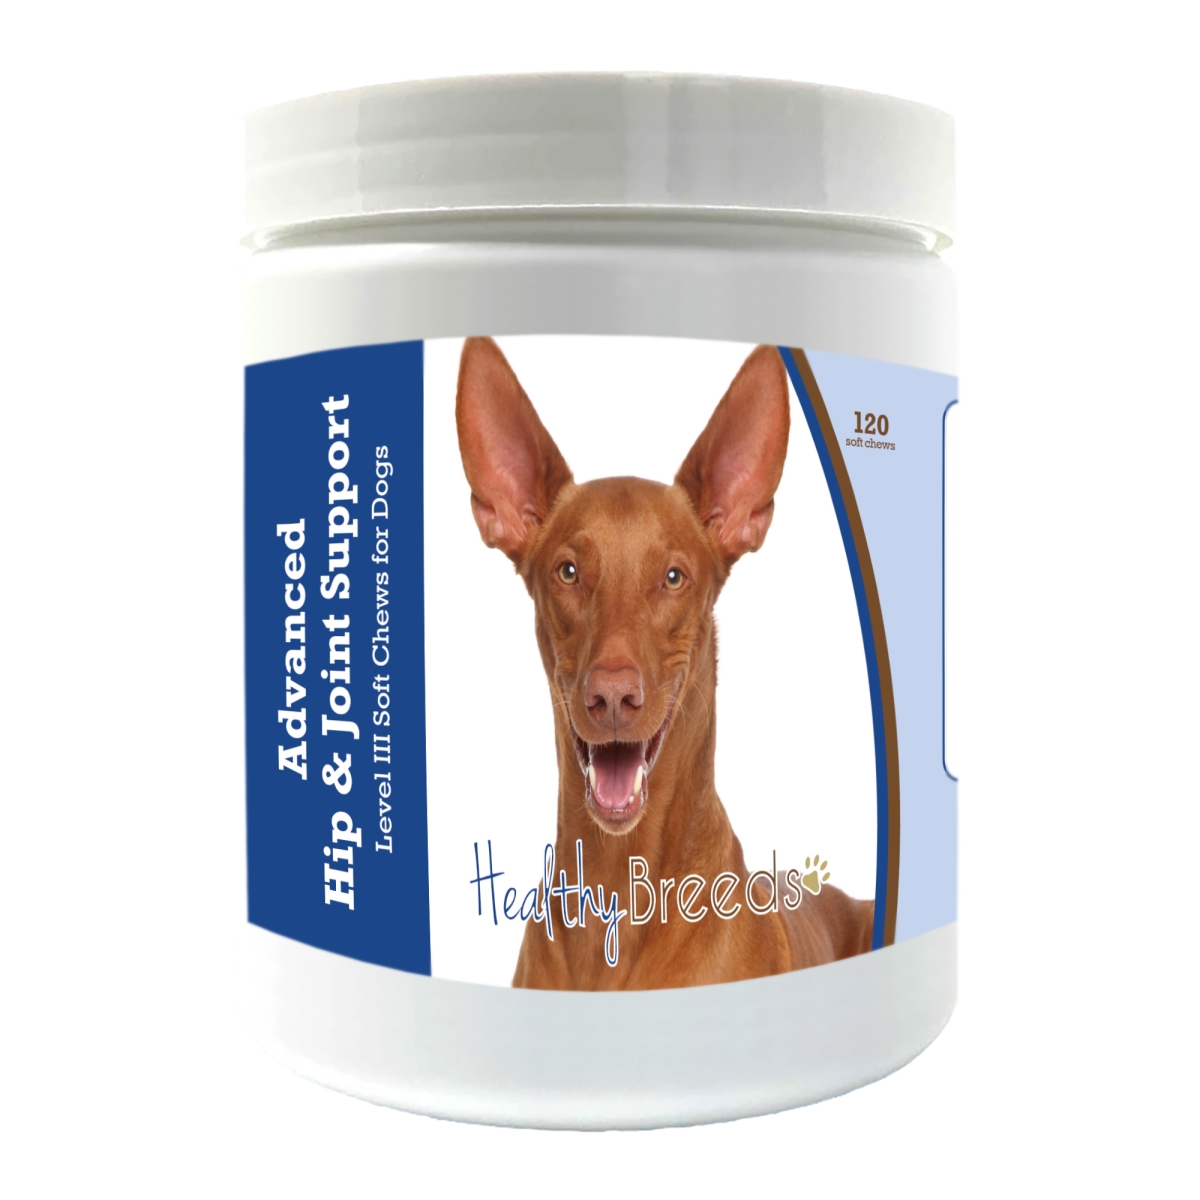 Picture of Healthy Breeds 192959898927 Pharaoh Hound Advanced Hip & Joint Support Level III Soft Chews for Dogs